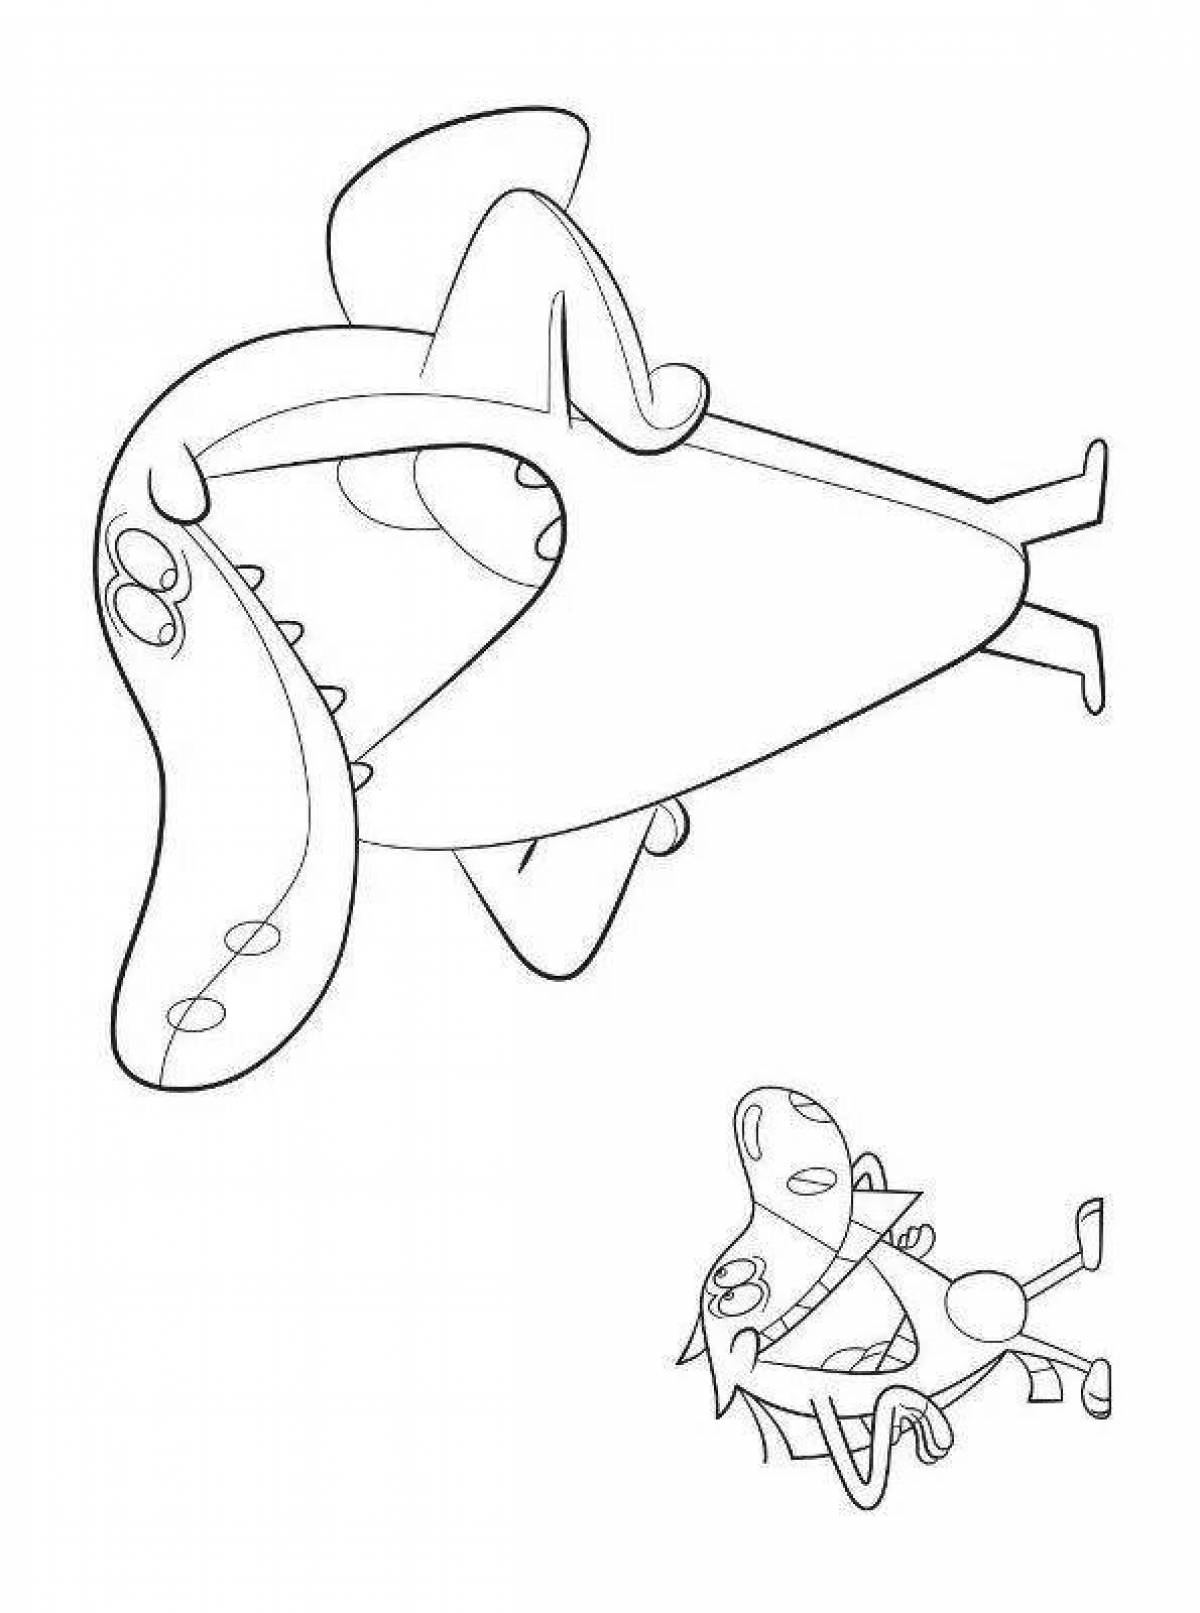 Zig and Sharko's playful coloring page